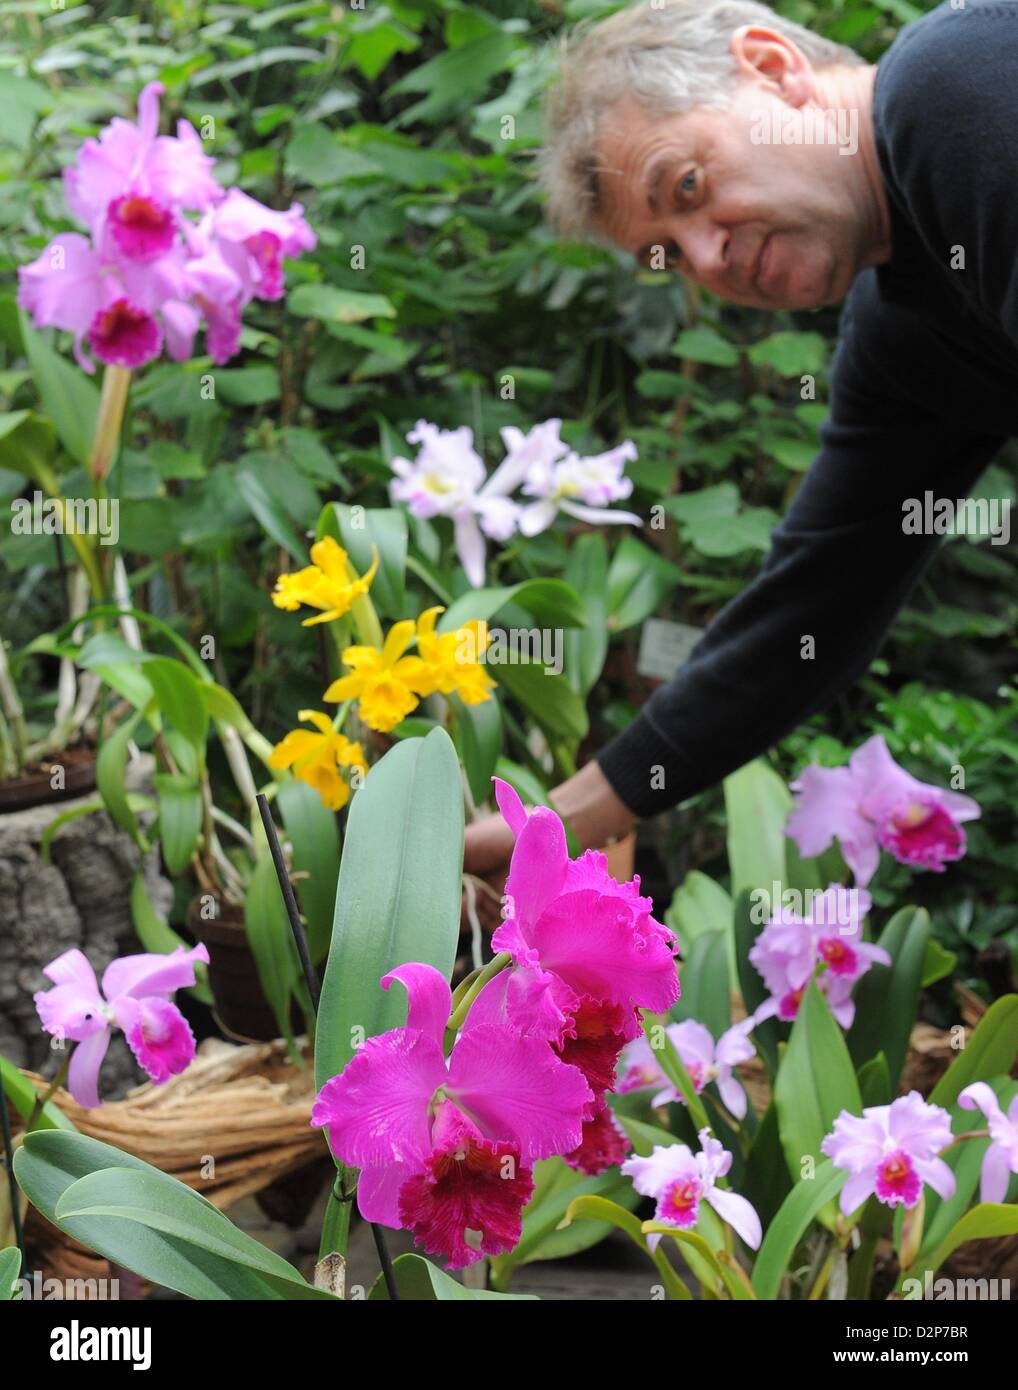 Orchid grower Hans Joachim Wlodarczyk places an orchid of the species cattleya in the orchid exhibition in the botanic gardens in  Potsdam, Germany, 30 January 2013. The exhibition features a variety of wild and grown orchid plants. Orchids are considered the second largest family of plants with more than 18.500 species. The exhibition runs from 31 January to 3 February 2013. Photo: Bernd Settnik Stock Photo